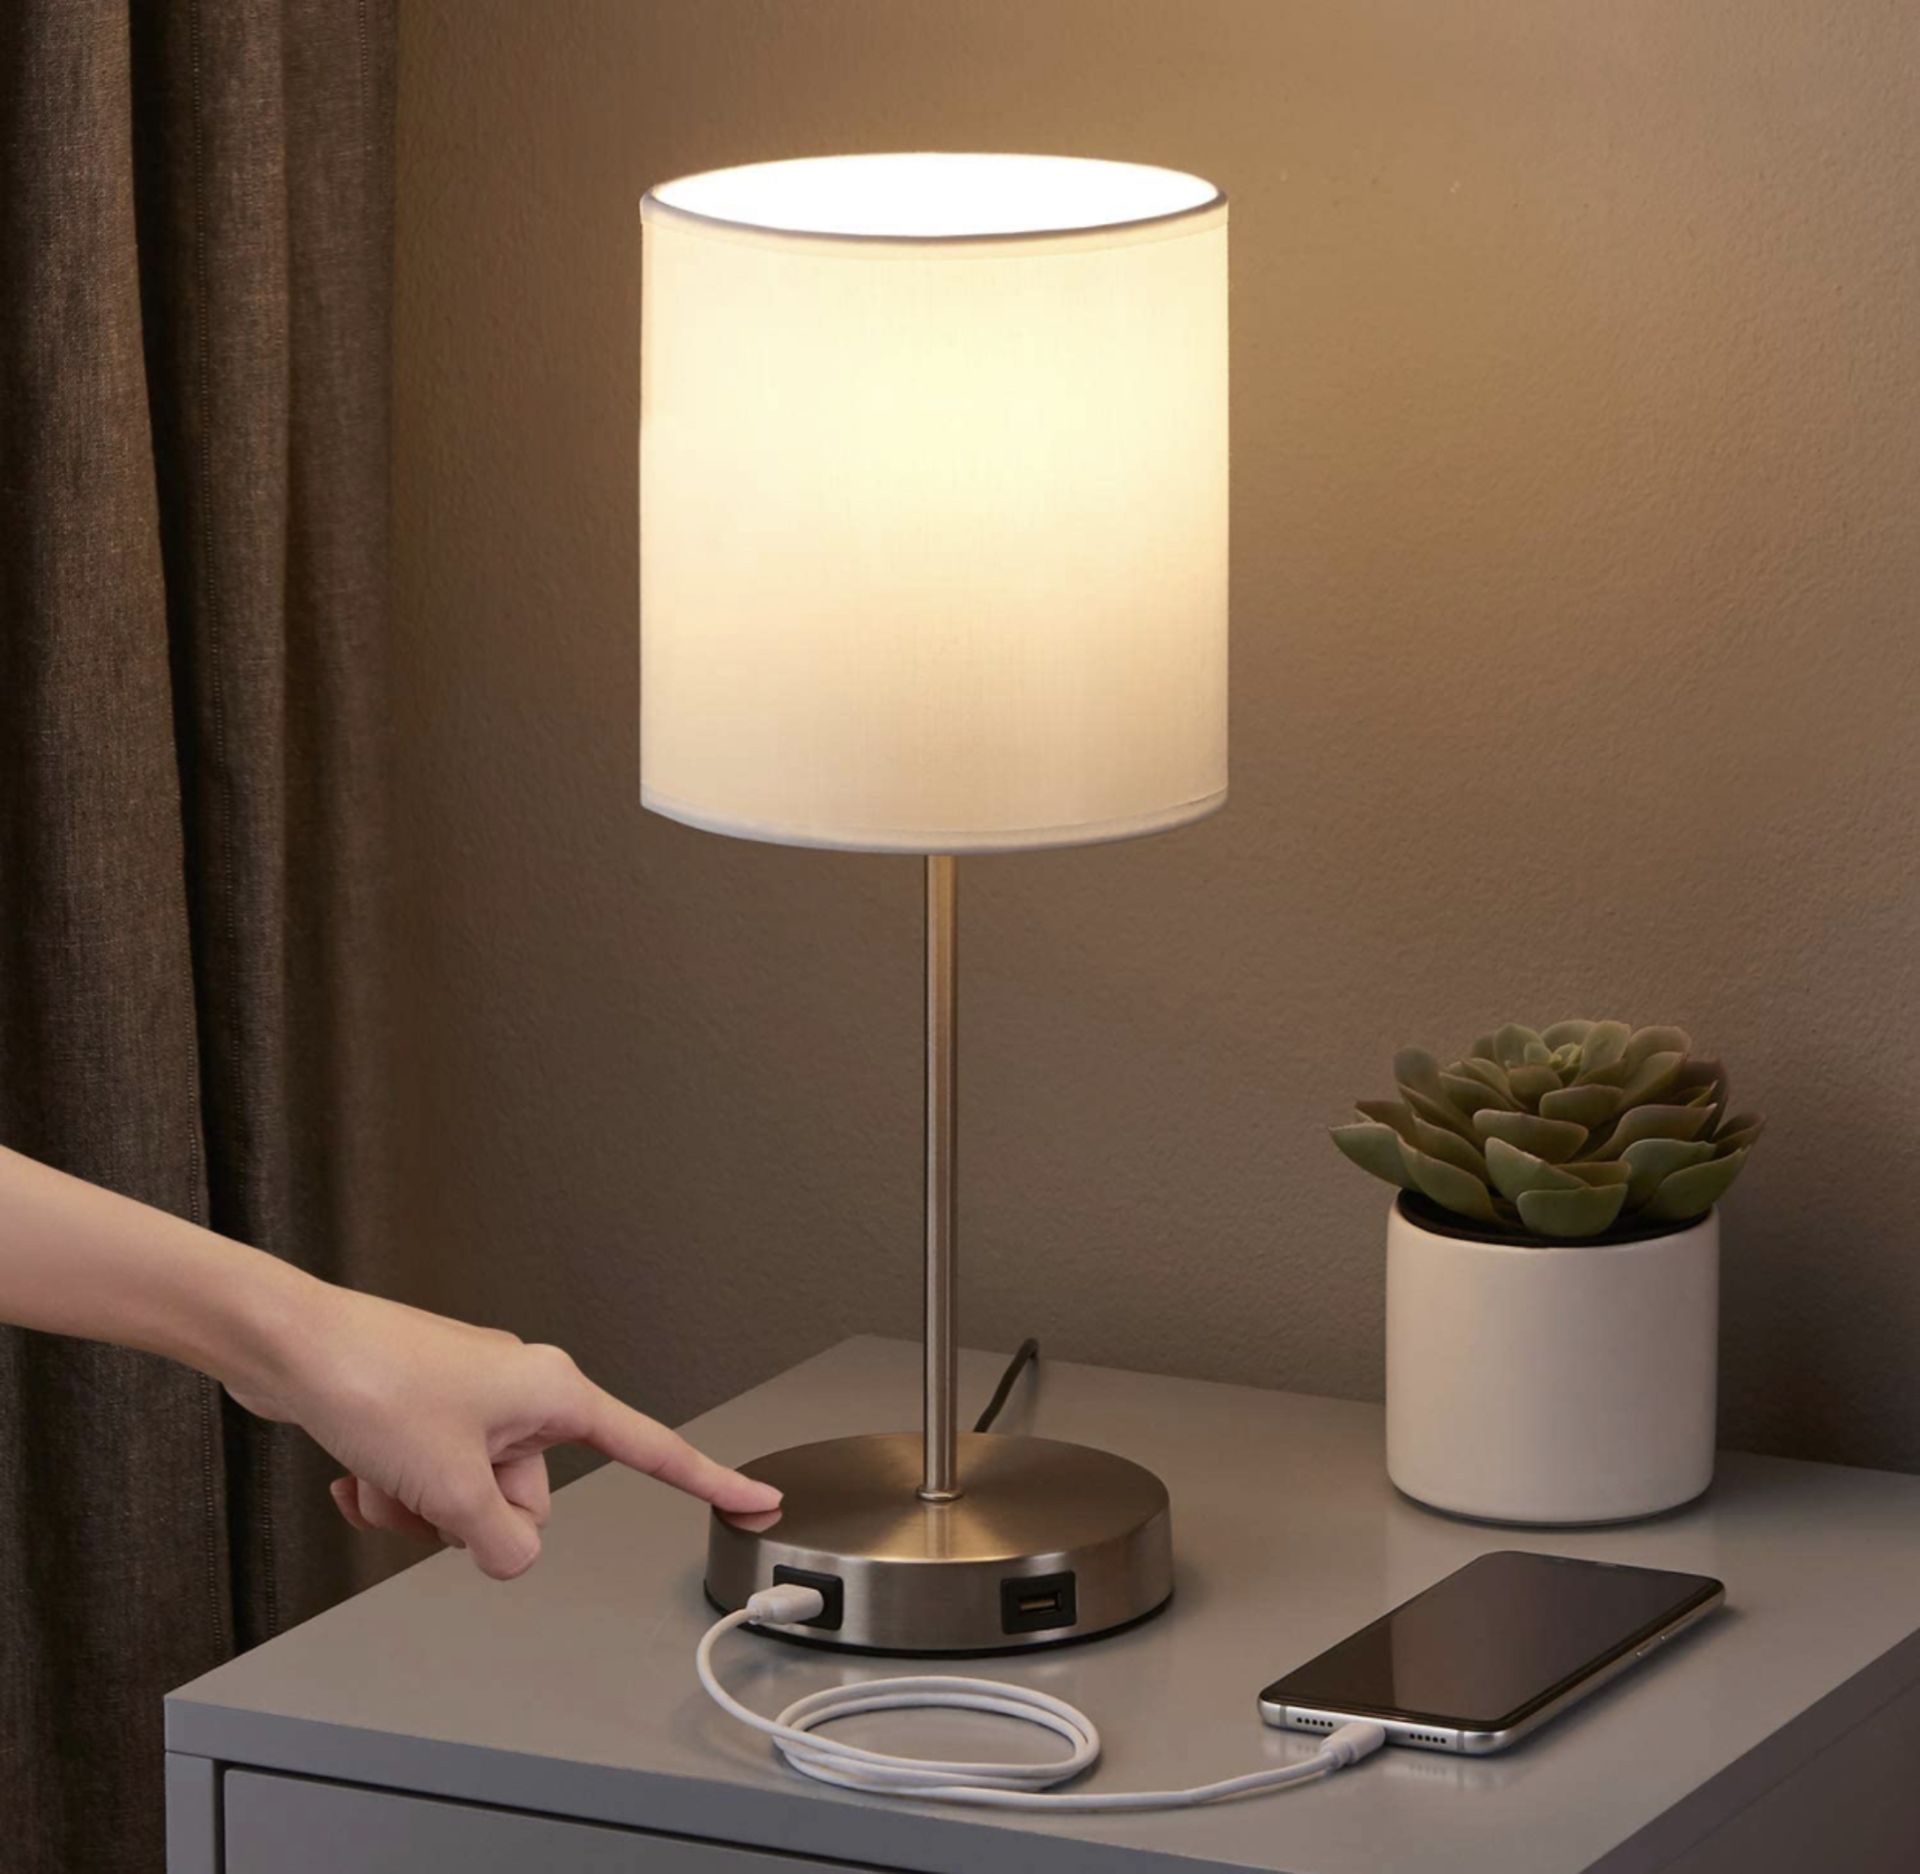 Seealle USB Touch Control Table Lamp with 2 USB Ports RRP £33.99